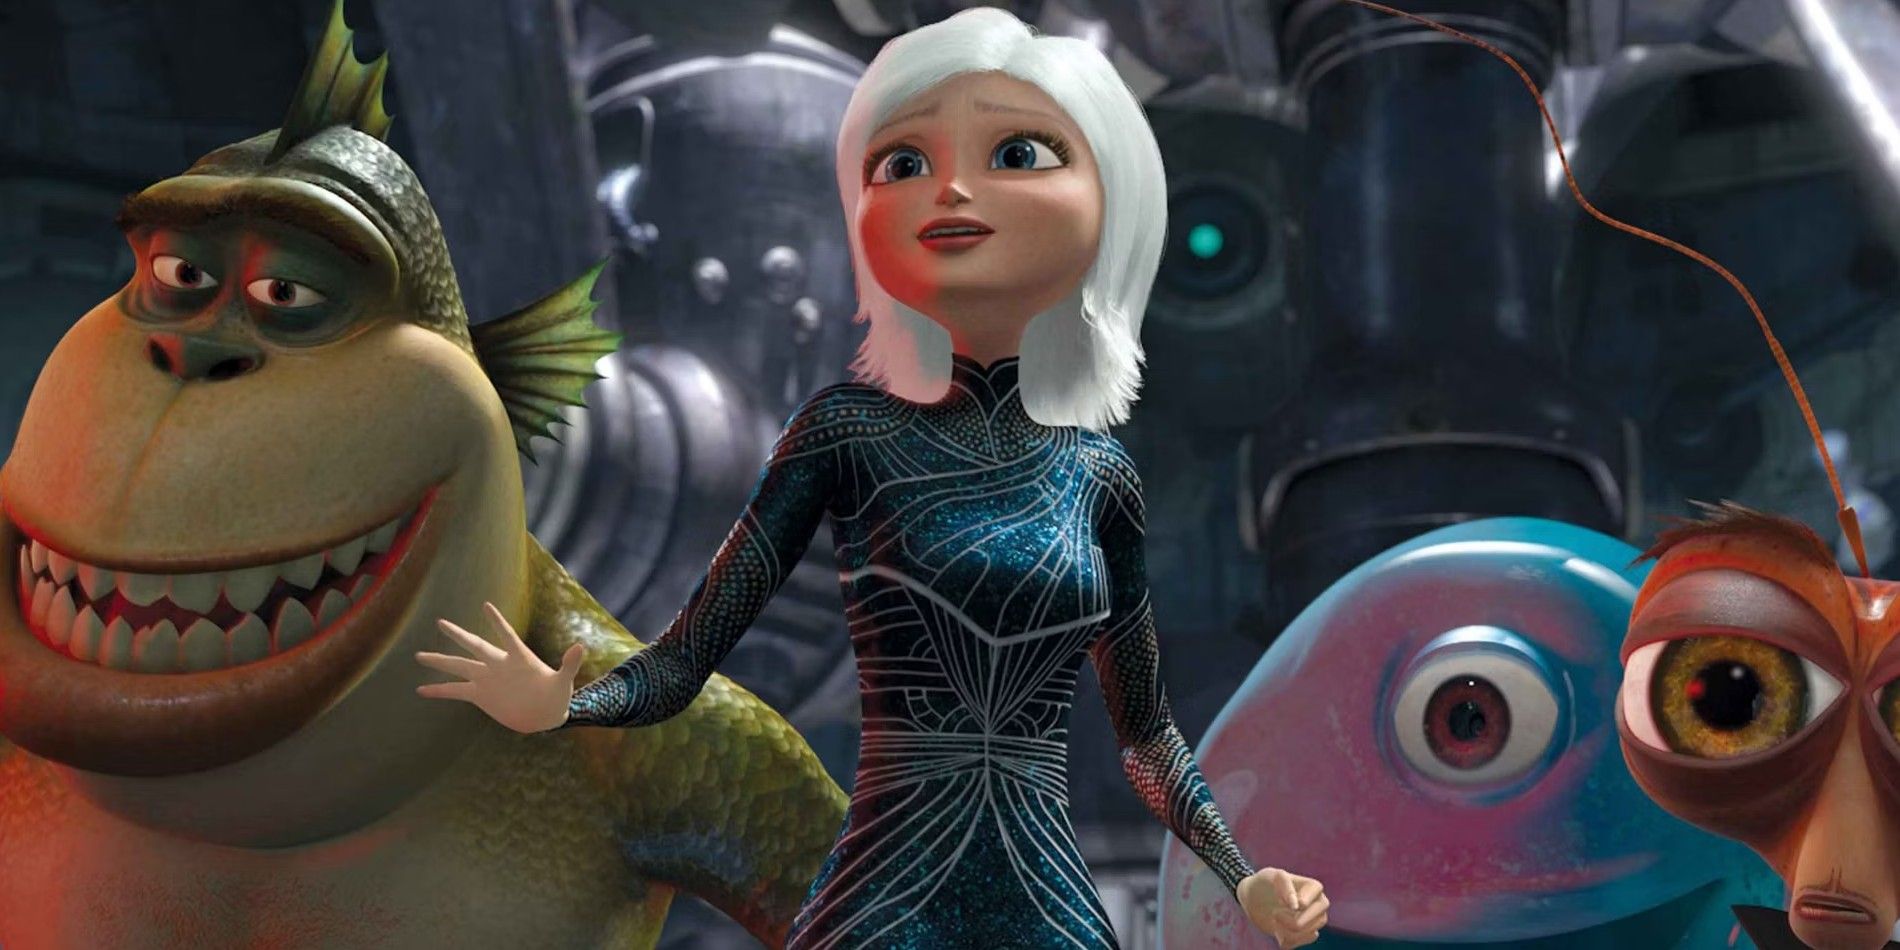 Susan Murphy and the rest of the monsters in DreamWorks' Monsters vs. Aliens